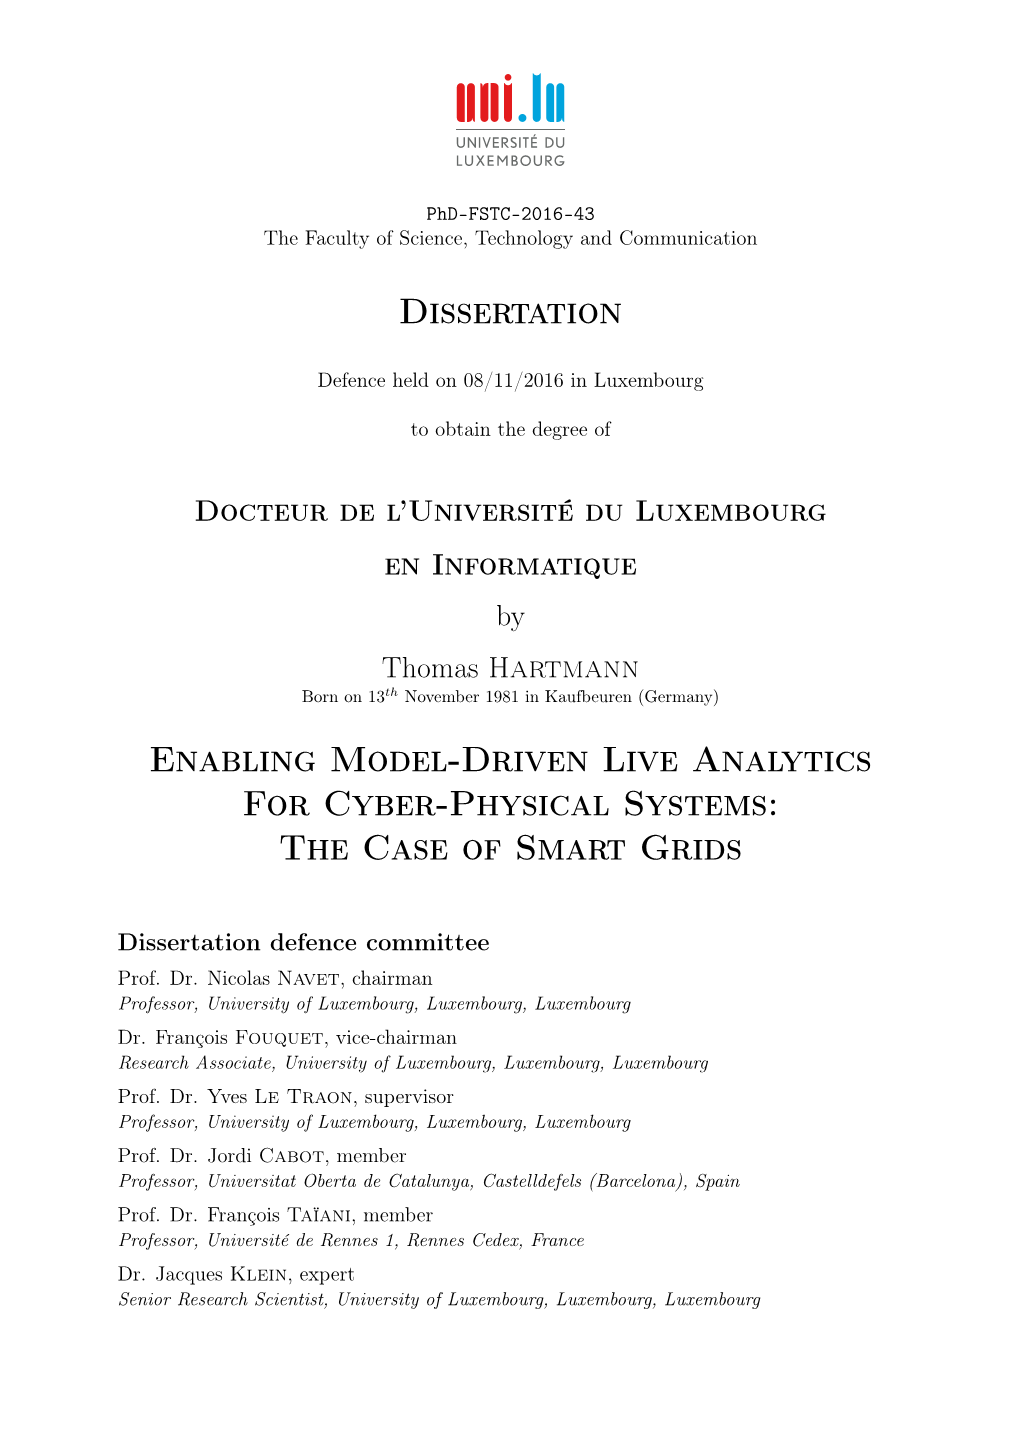 Dissertation Enabling Model-Driven Live Analytics for Cyber-Physical